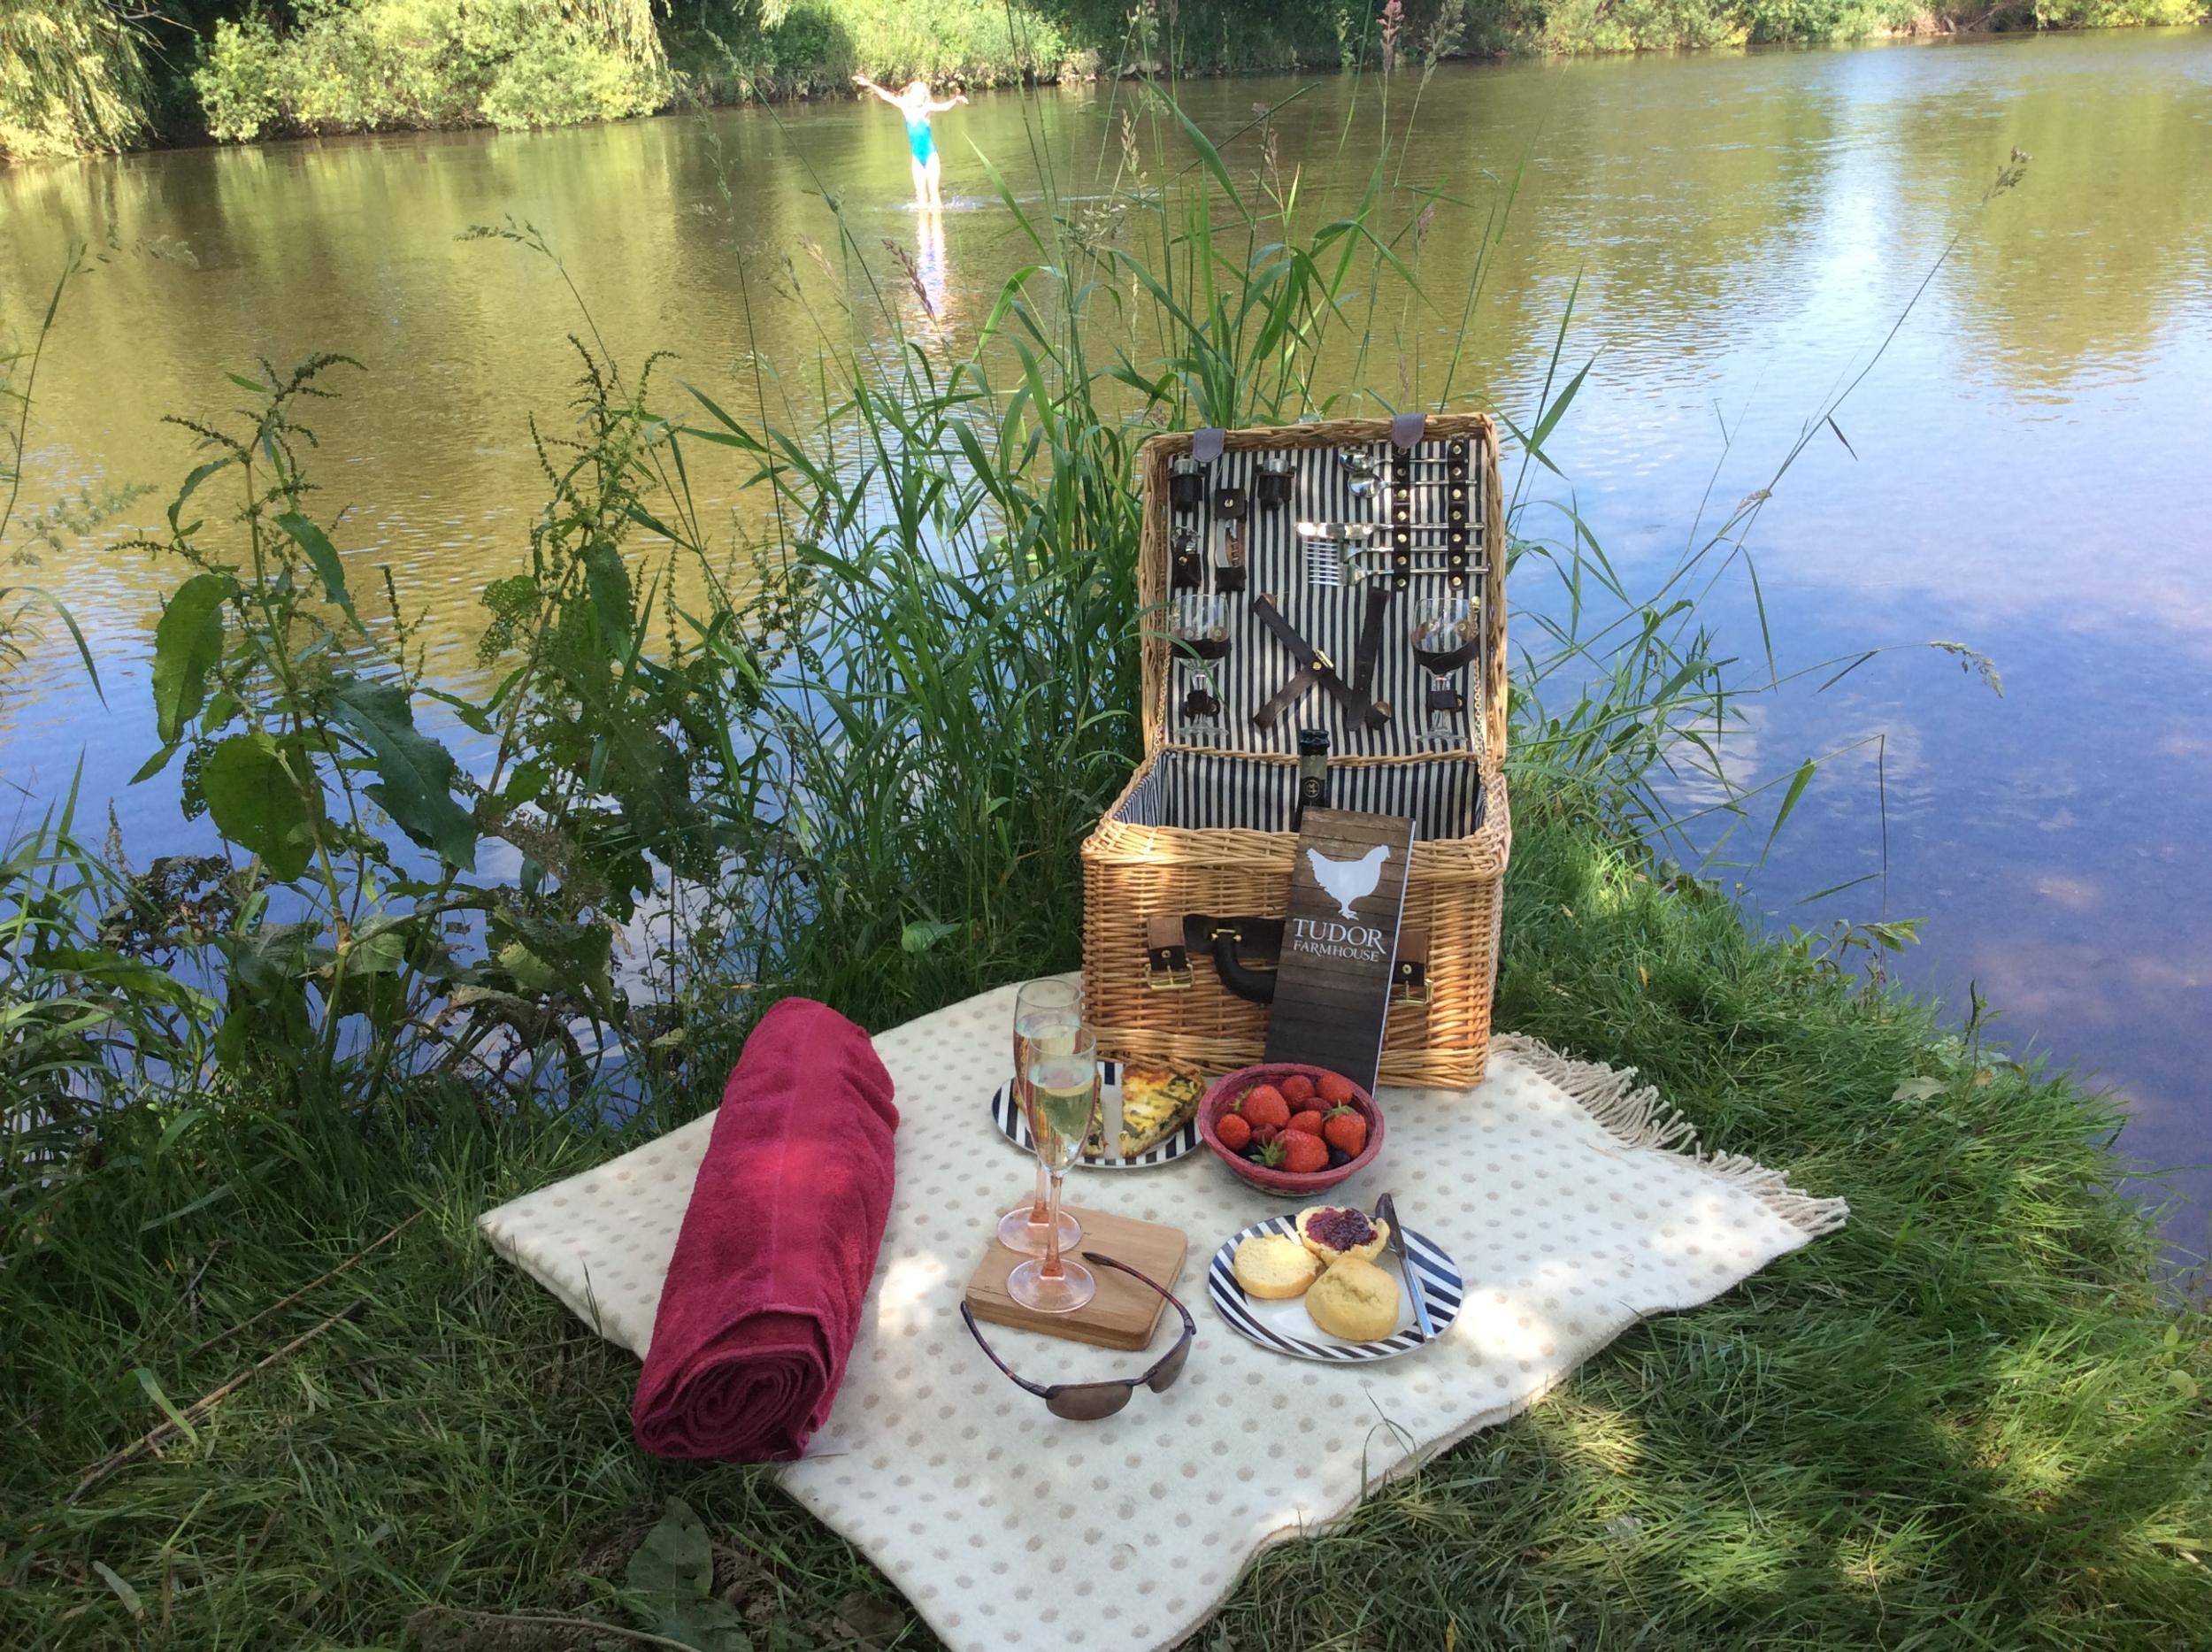 Wild swimming comes with a breakfast hamper